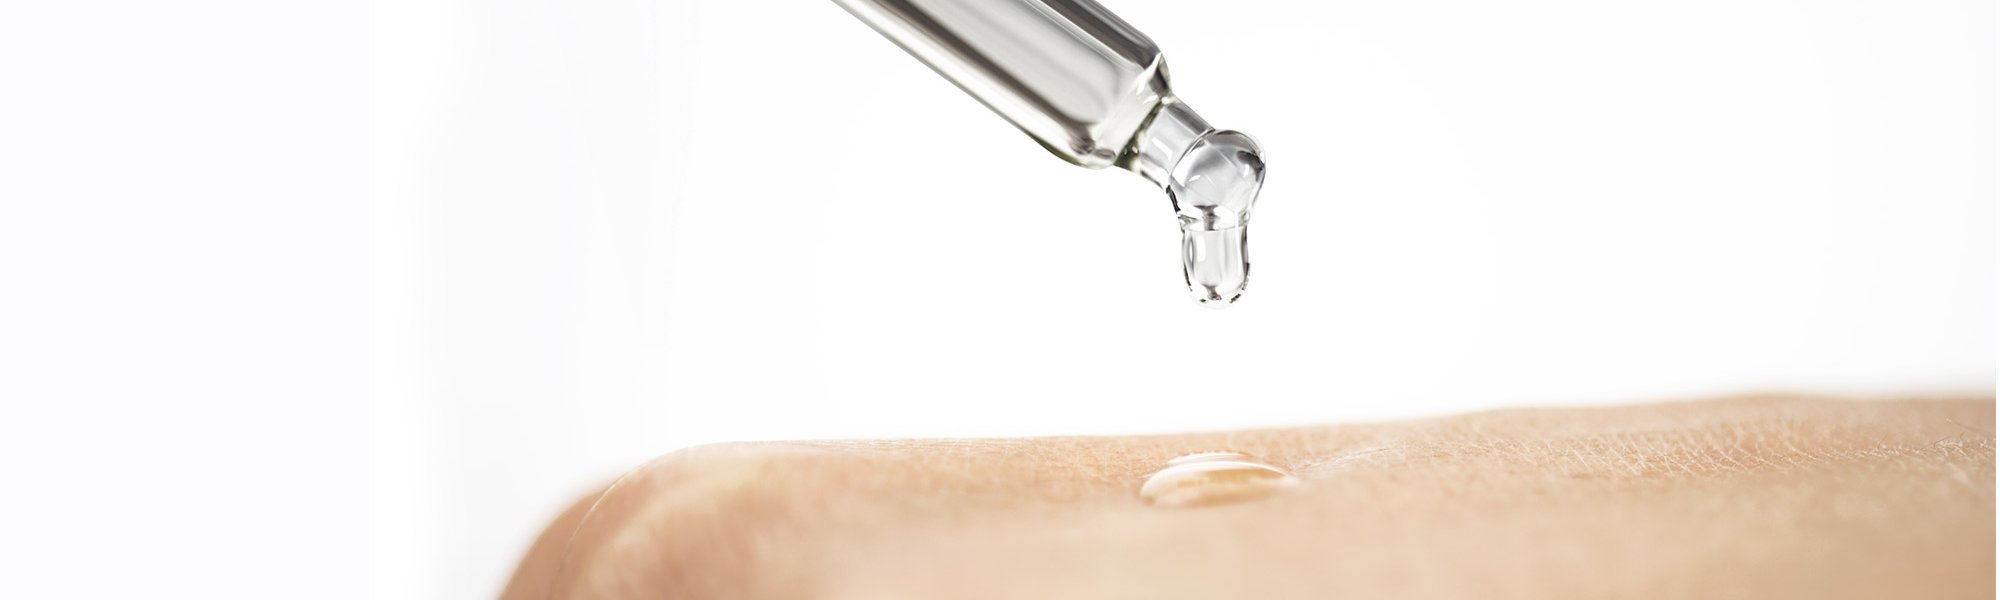 Everybody Is Talking About The Benefits Of Hyaluronic Acid For Your Skin